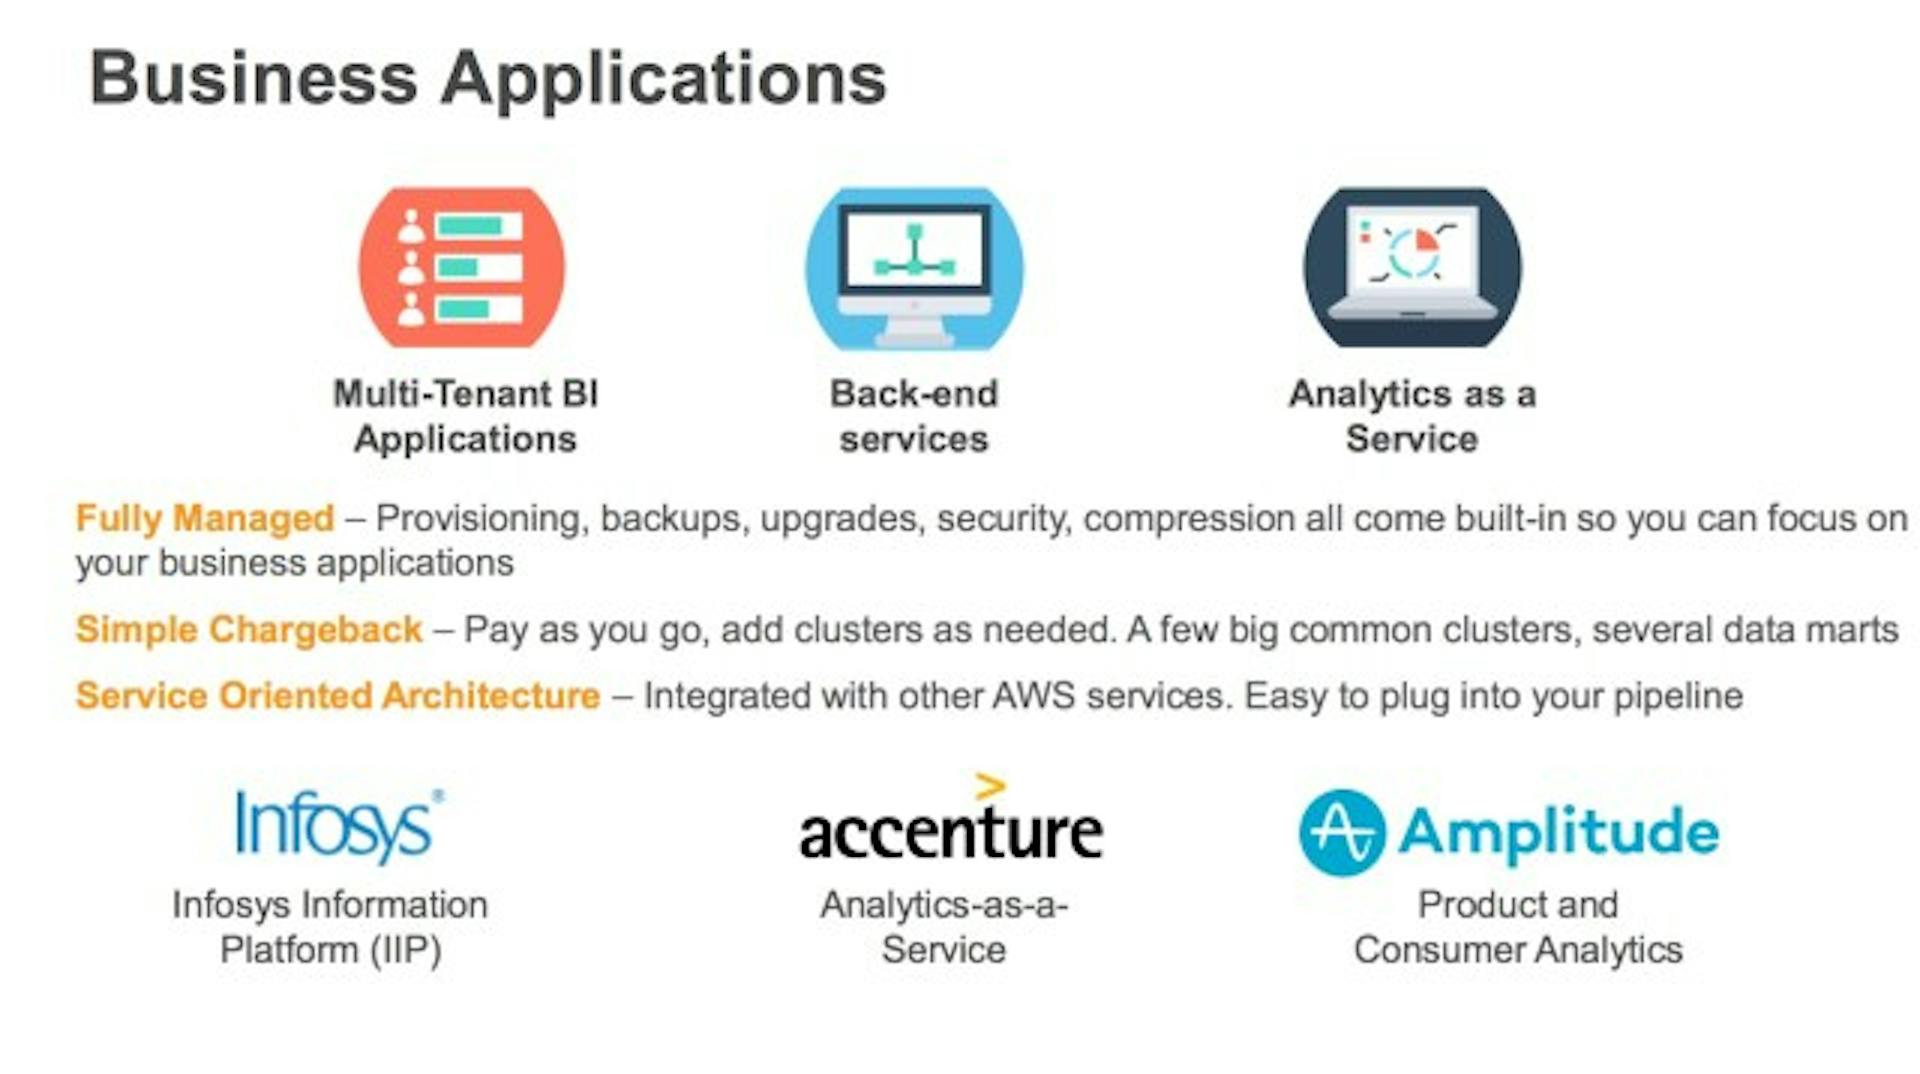 Explore More About AWS Services